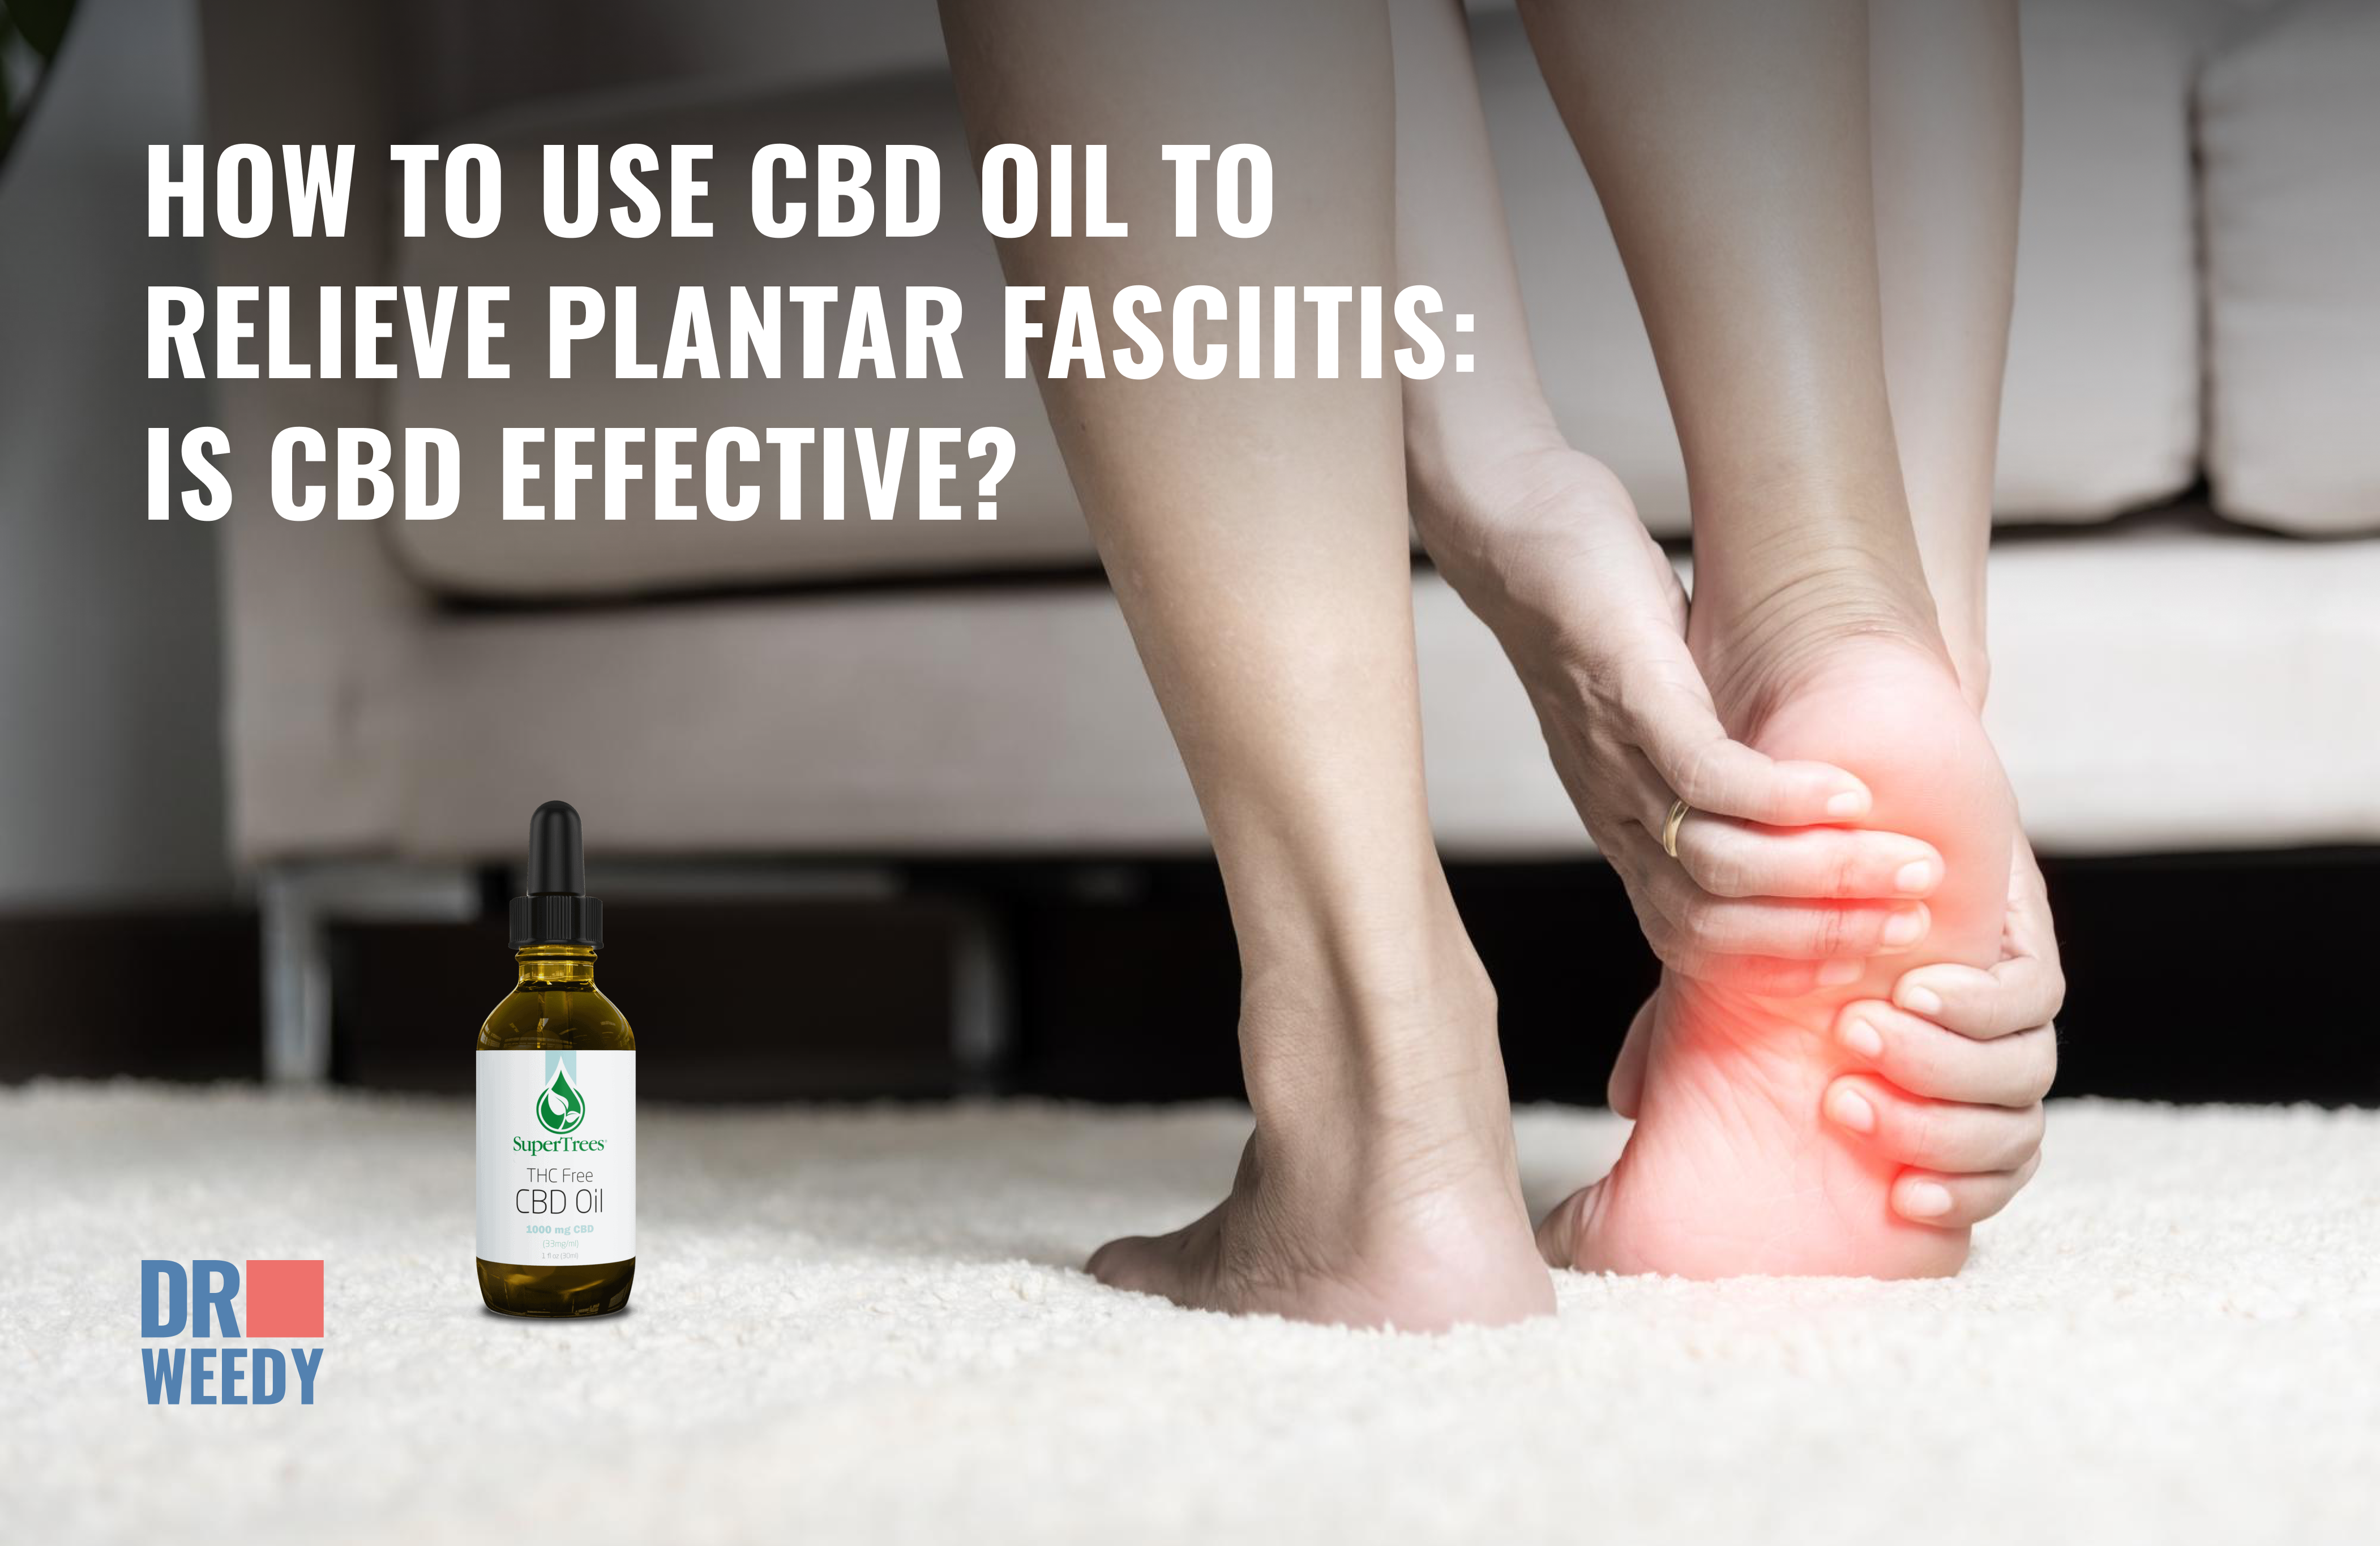 How to Use CBD Oil to Relieve Plantar Fasciitis: Is CBD Effective?